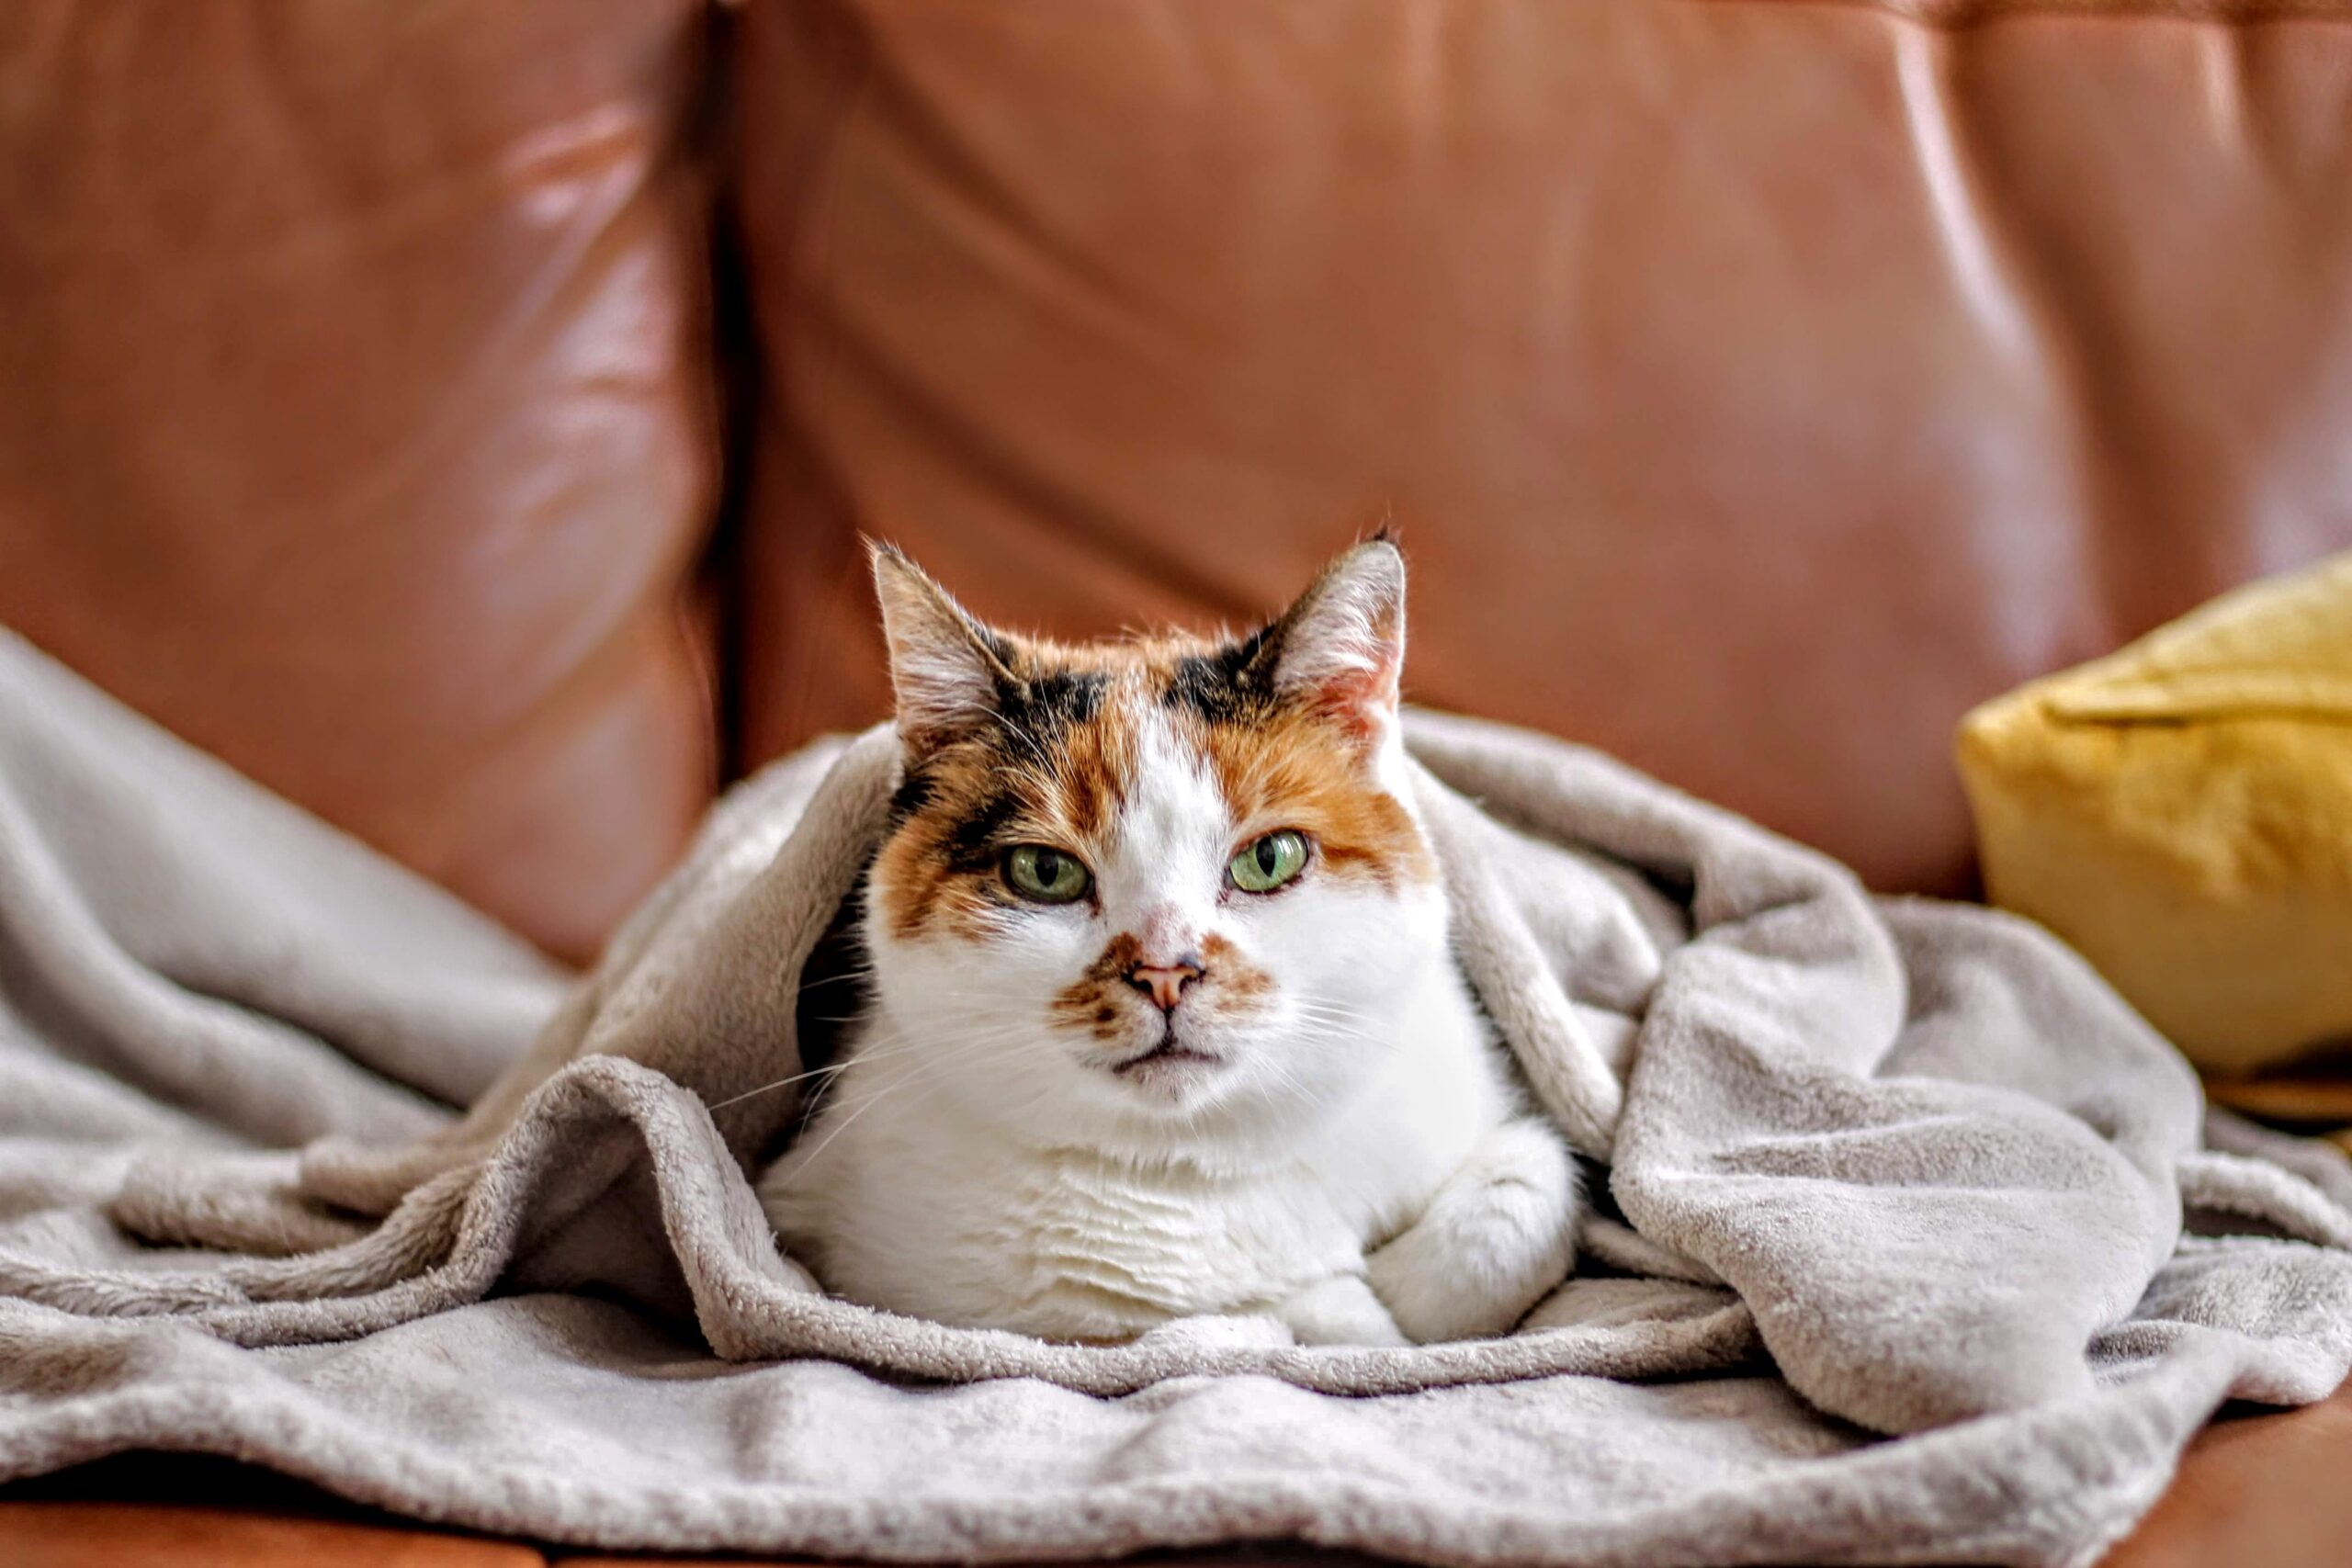 Calico cat in a blanket on a leather couch